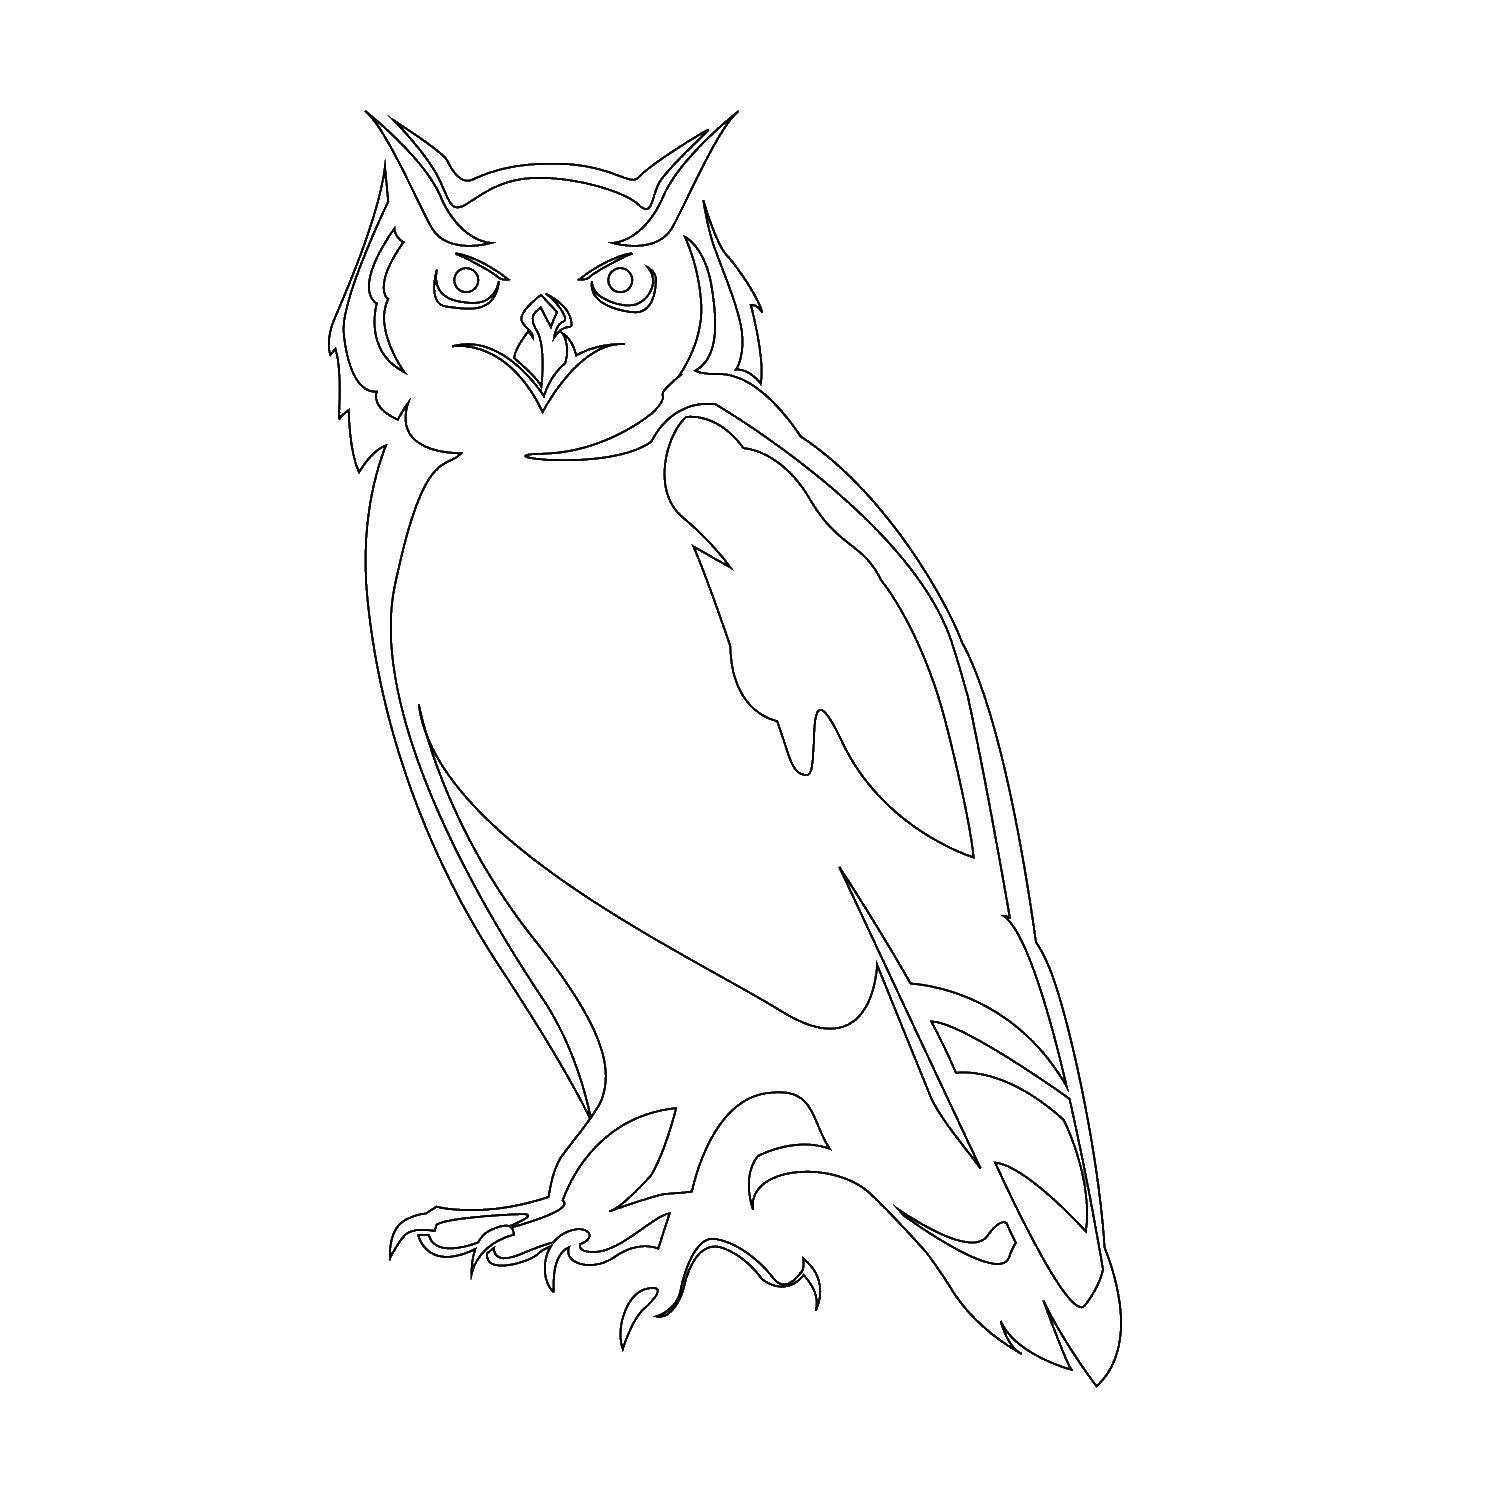 Coloring Unusual owl. Category The contours for cutting out the birds. Tags:  Birds, owl.